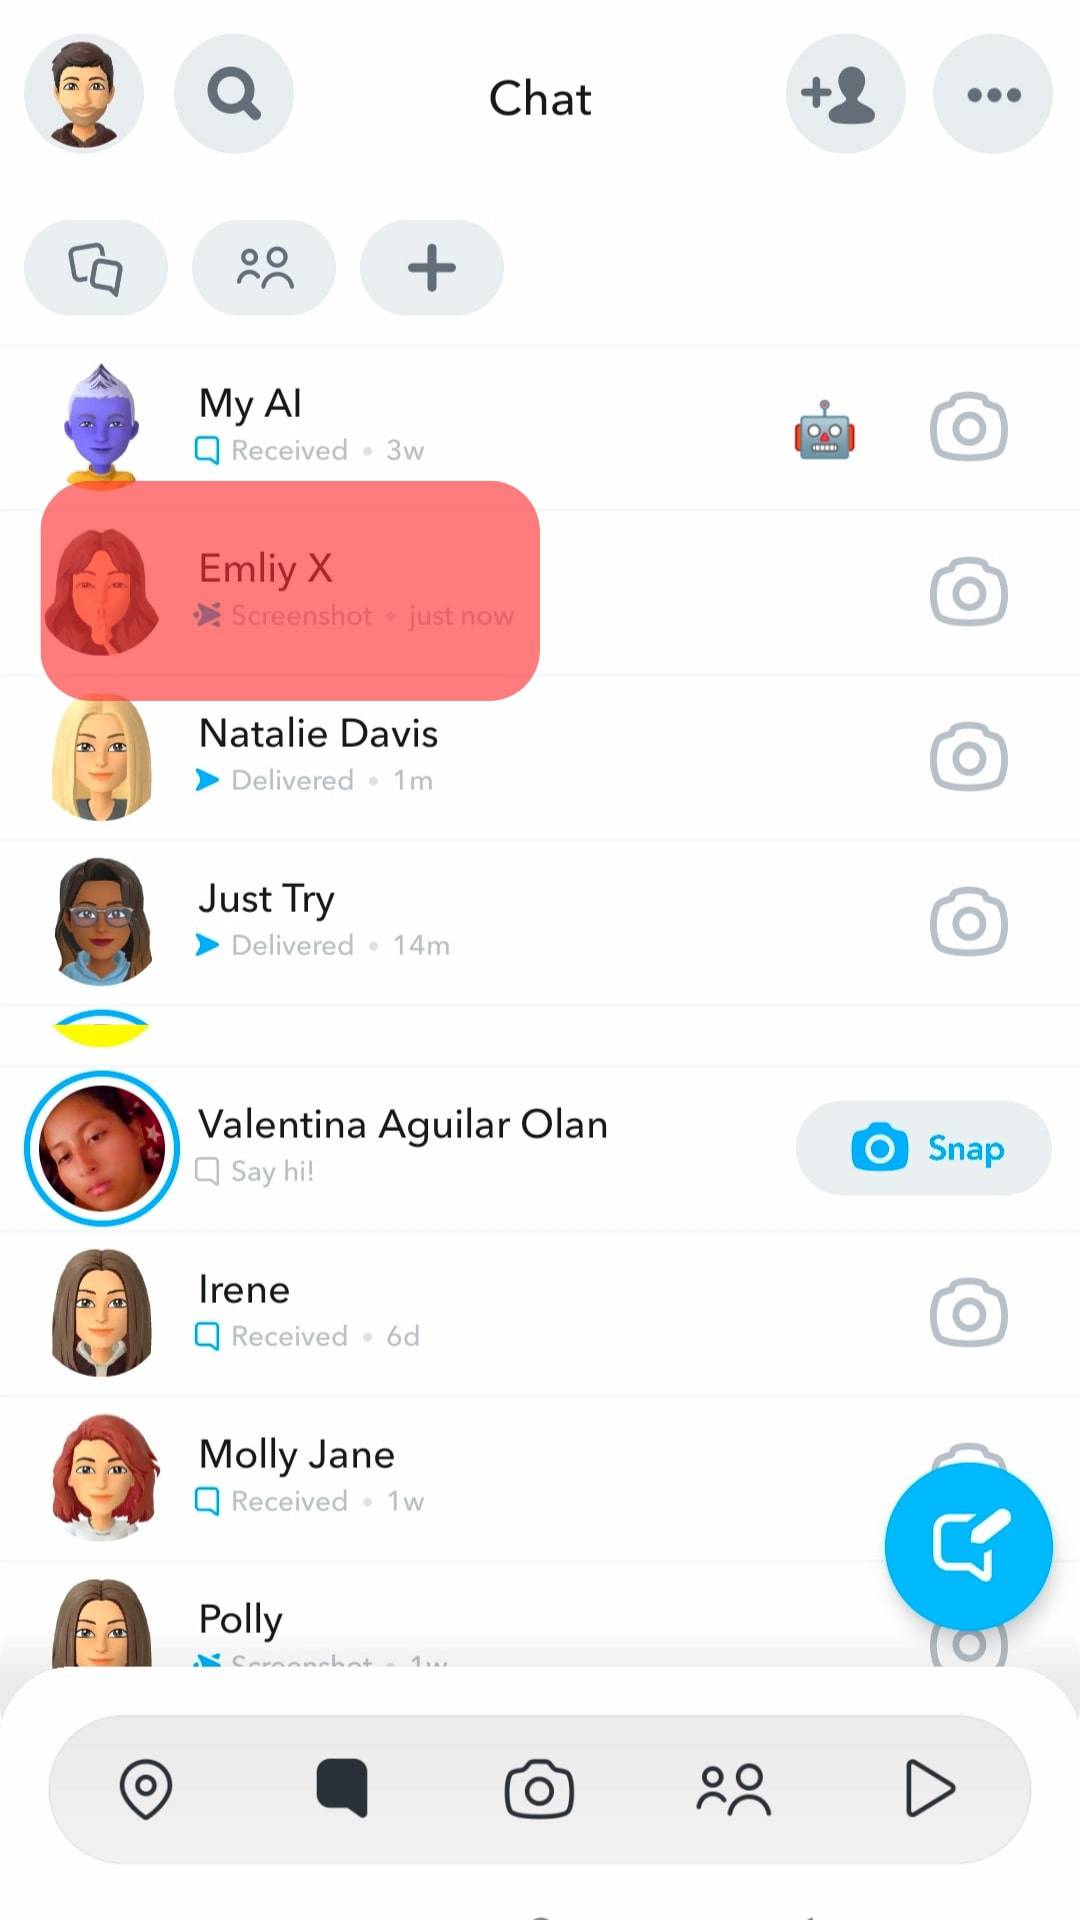 Select The Friend's Chat Snapchat